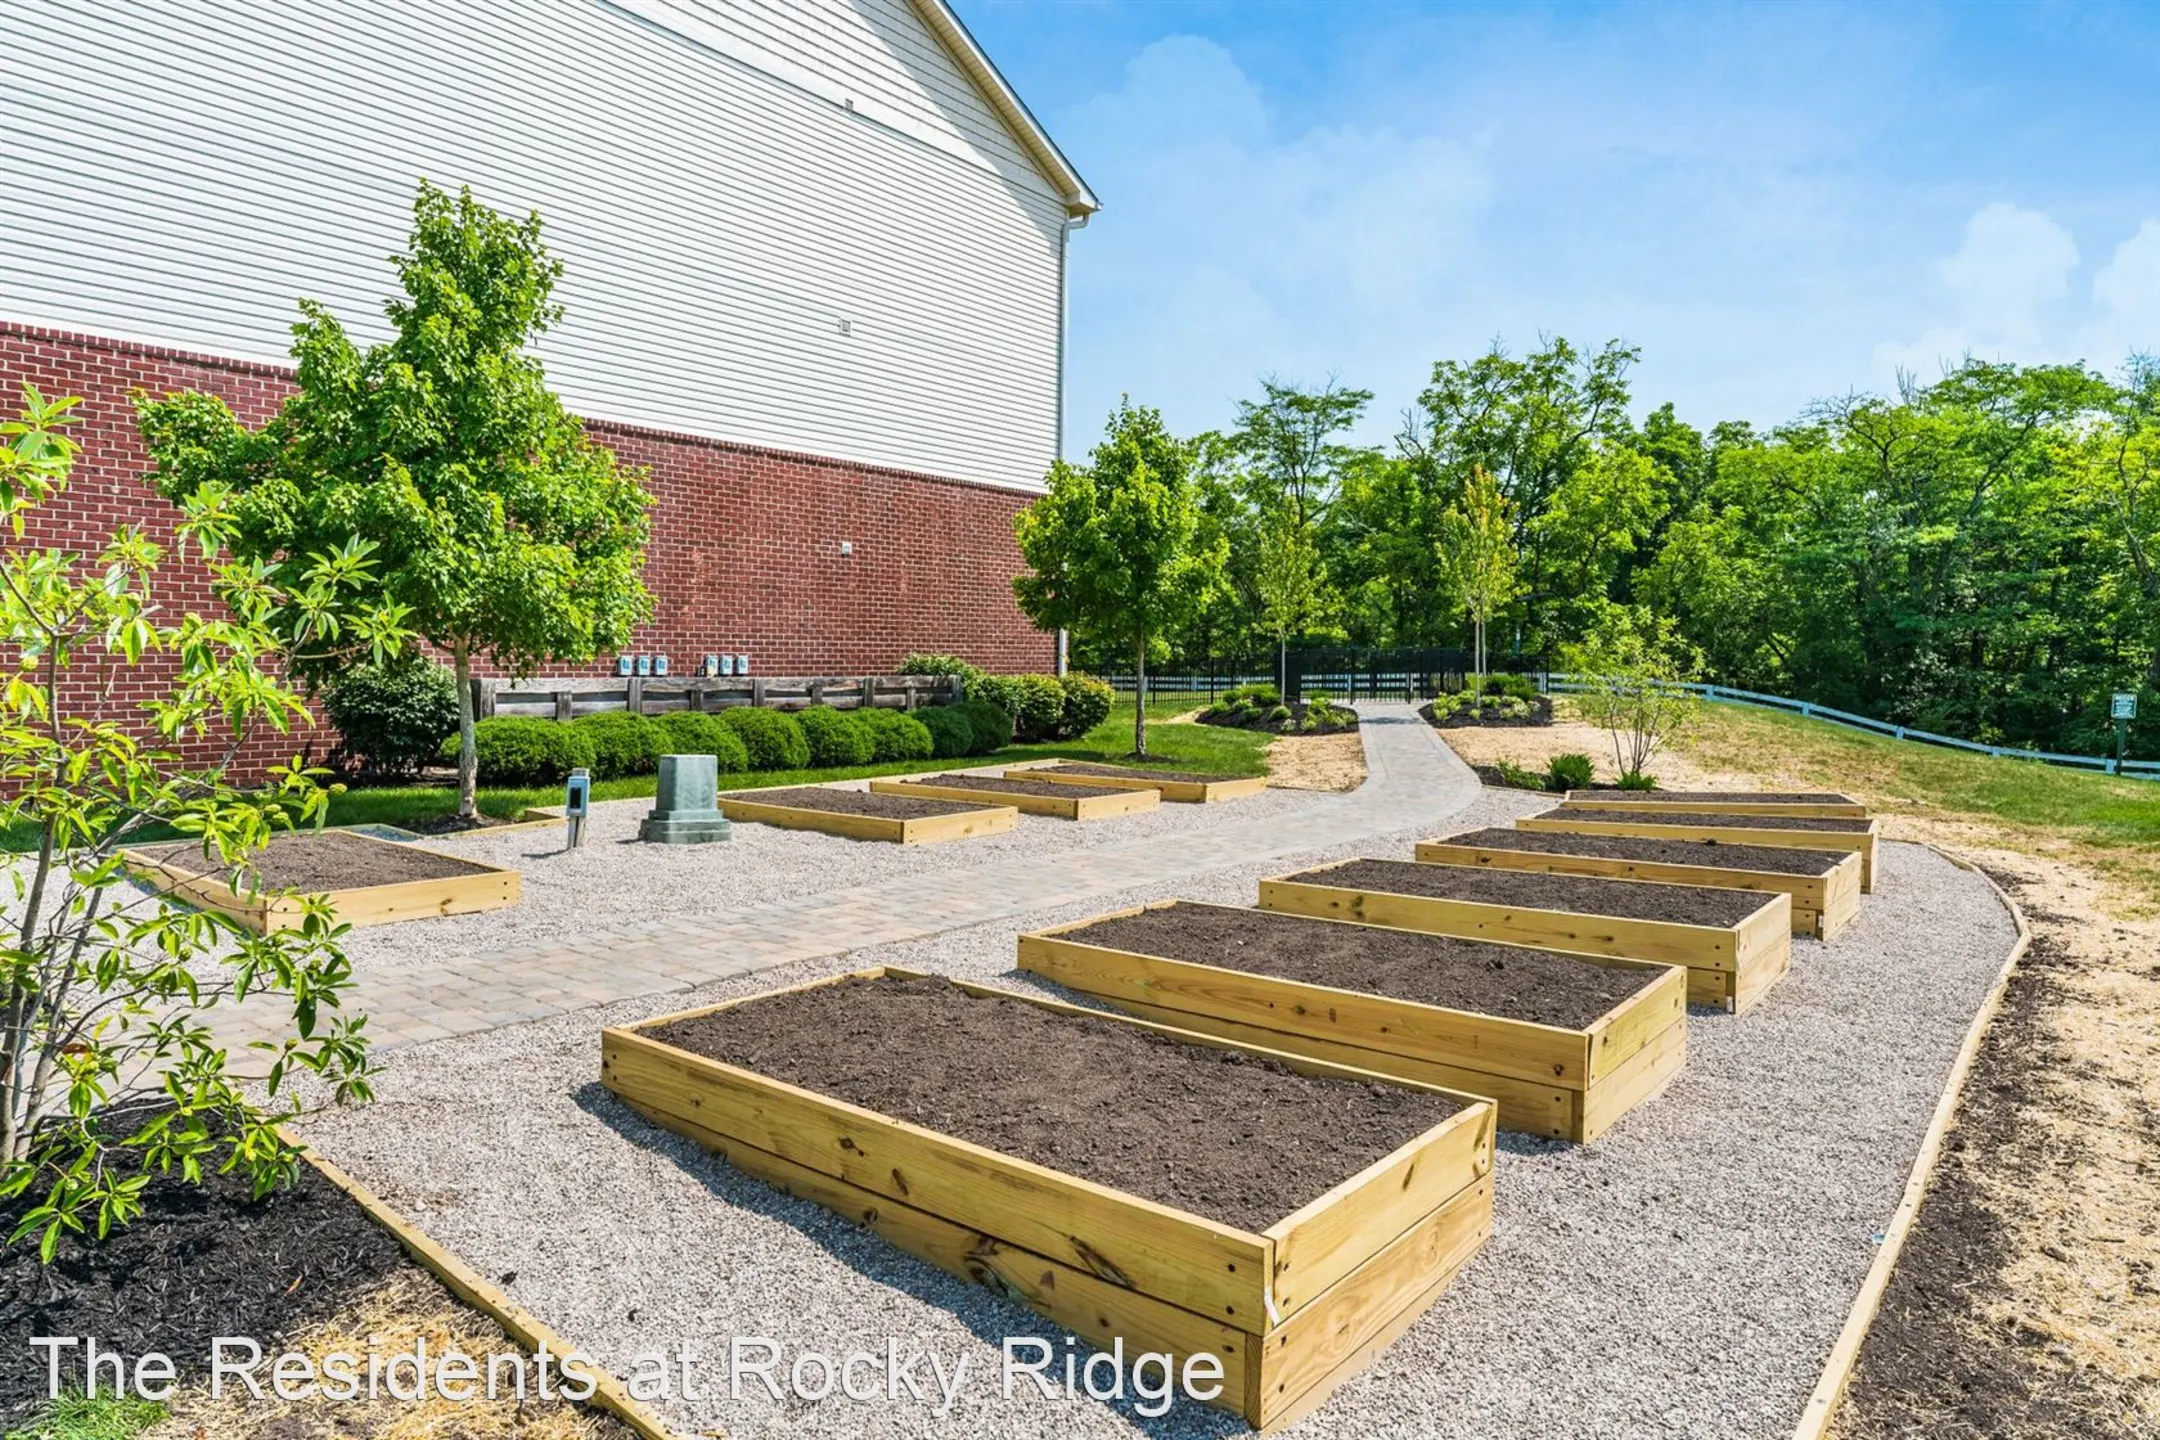 Building - The Ravines At Rocky Ridge Apartments - Westerville, OH